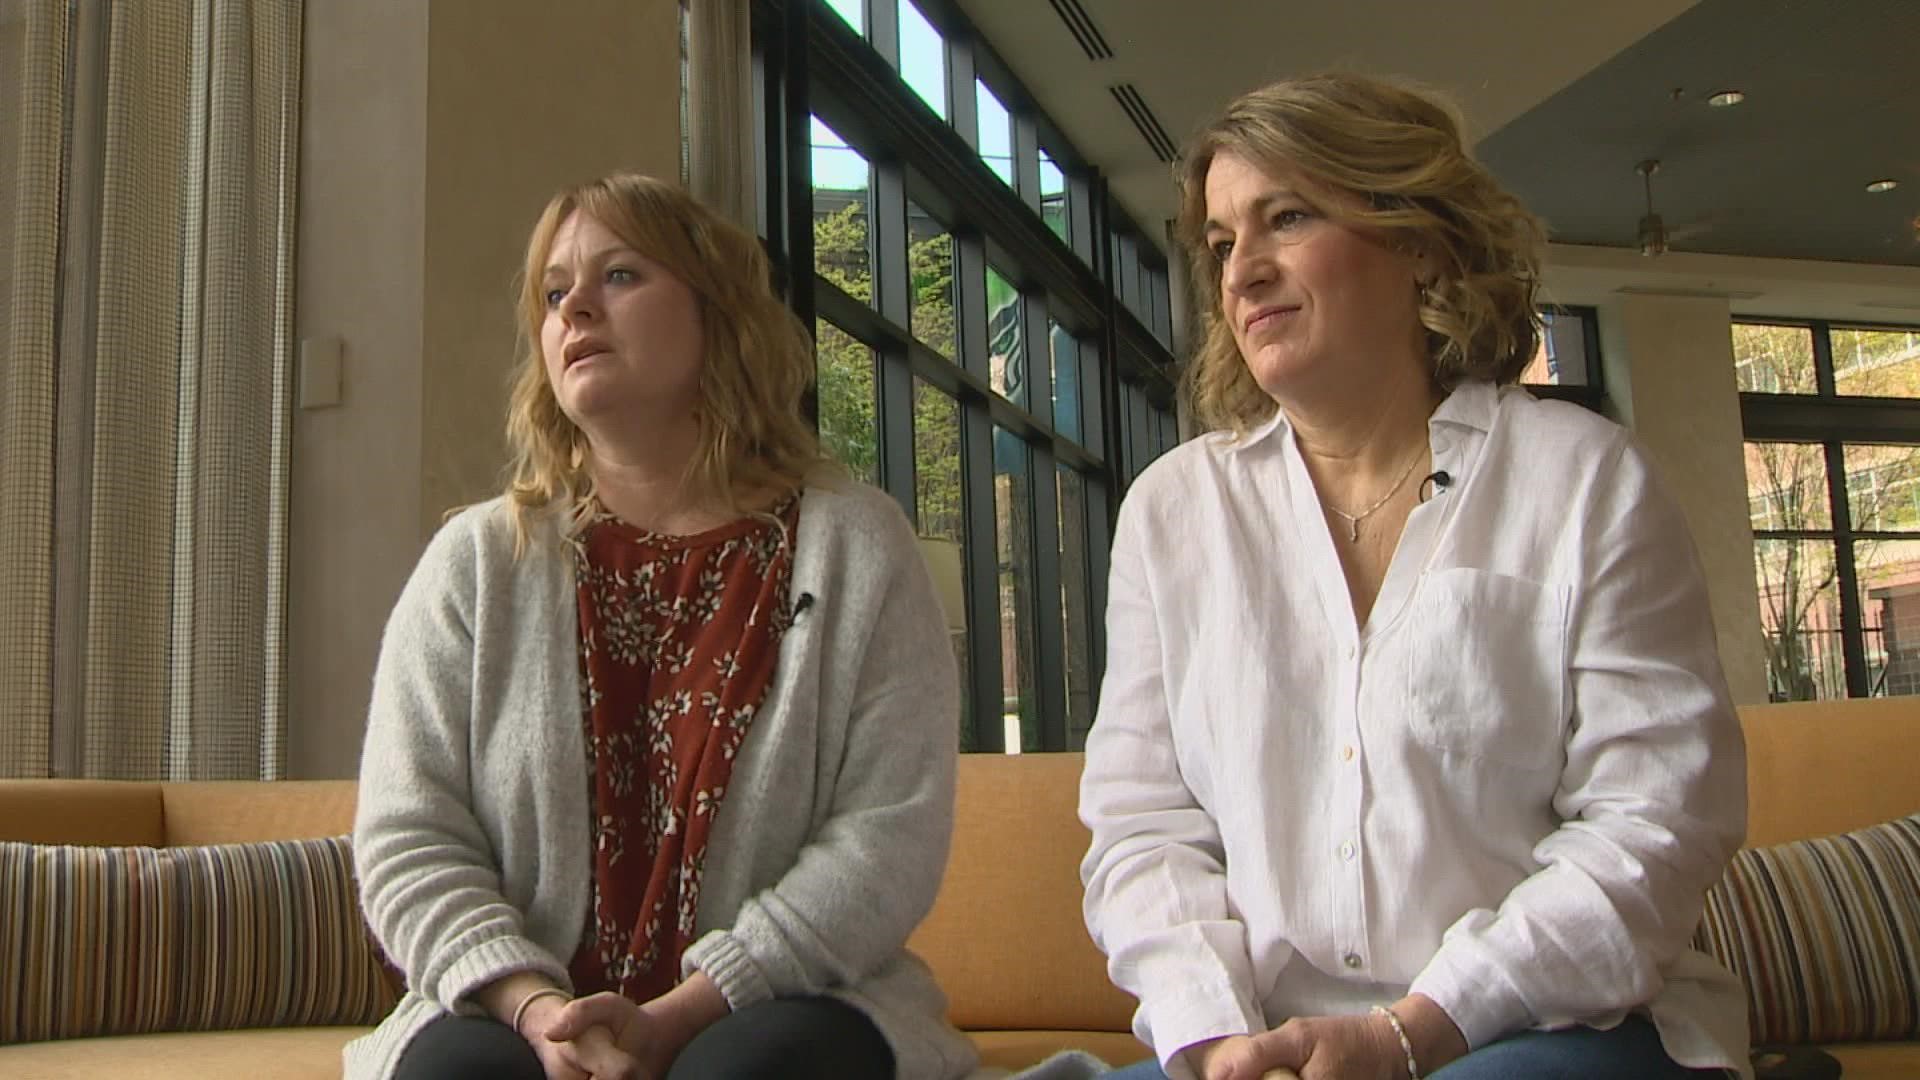 Two sexual assault survivors talk about finally finding closure after their cases sat cold for decades.